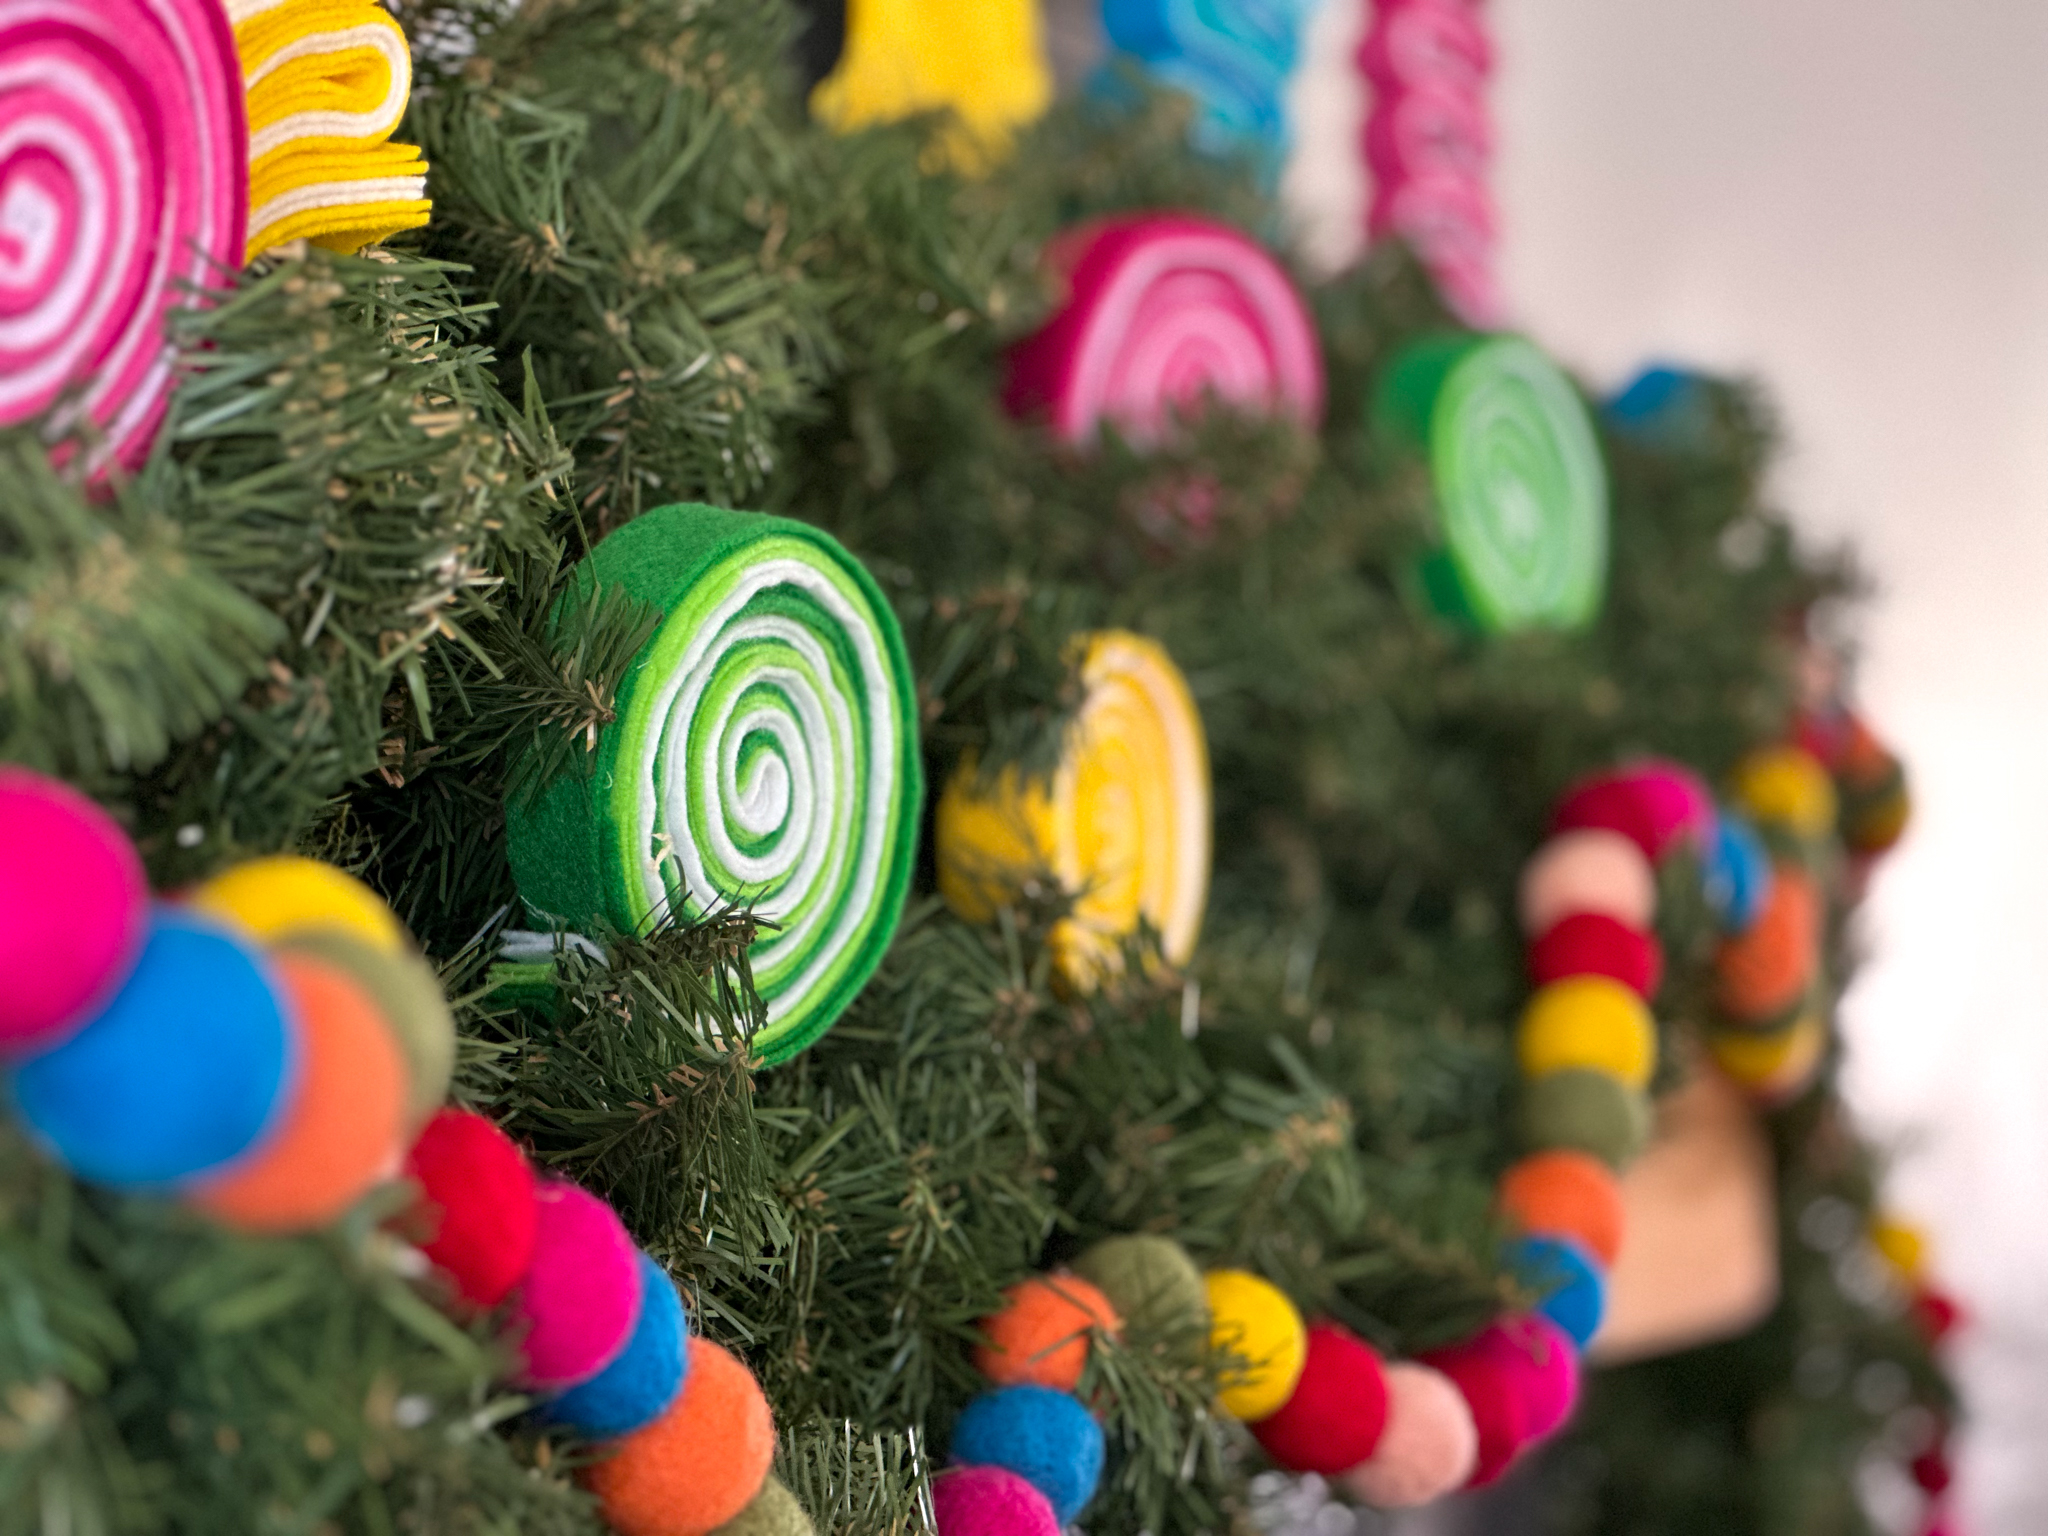 Handmade Candy land Christmas prop/ornaments, fake candy and